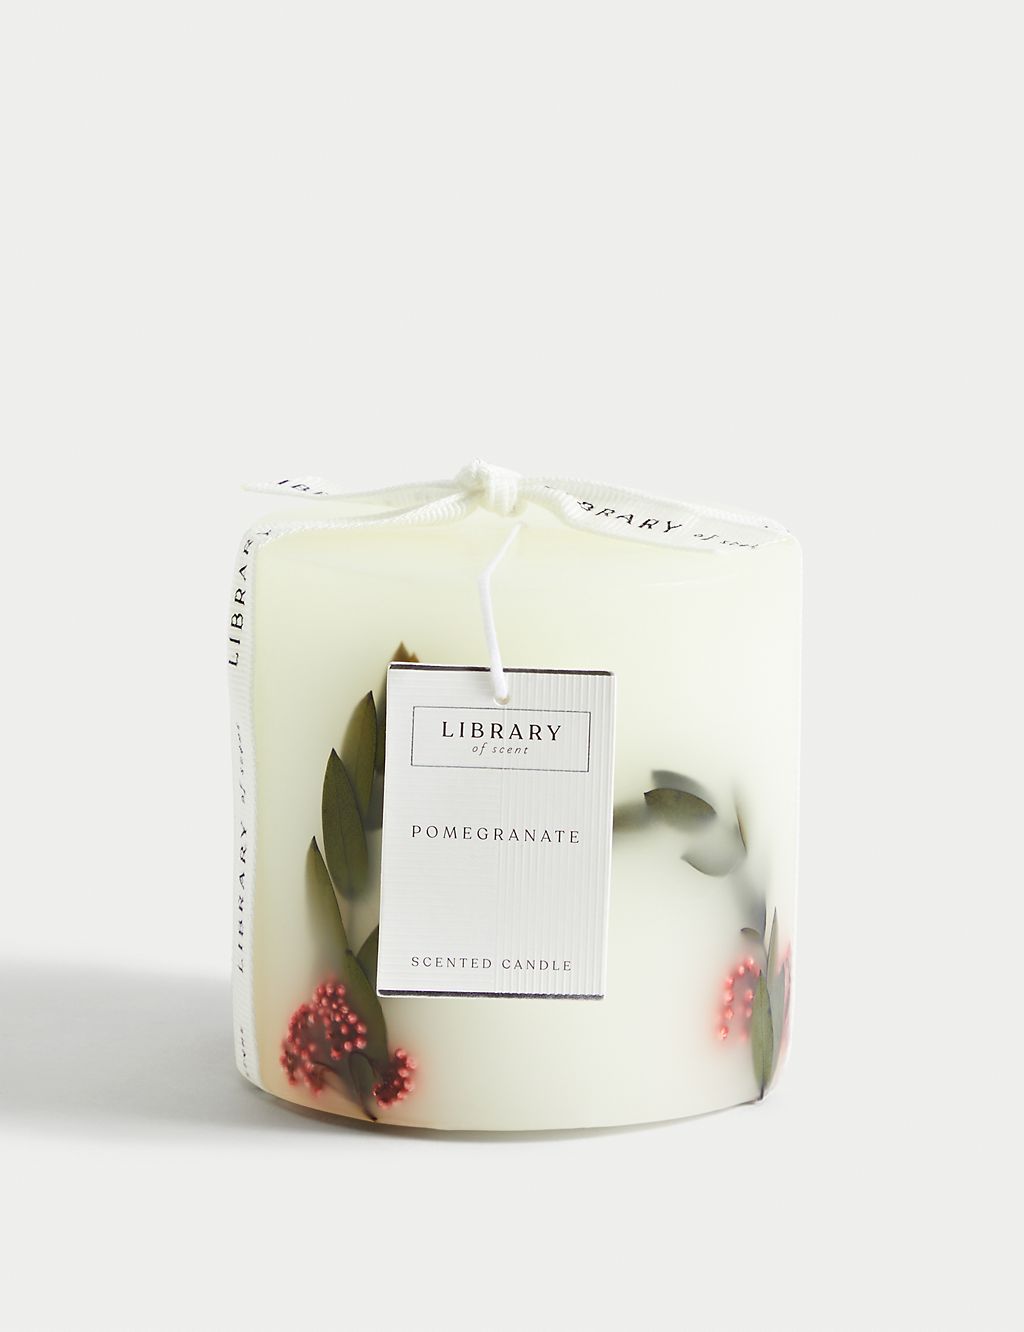 Pomegranate Scented Candle 1 of 5